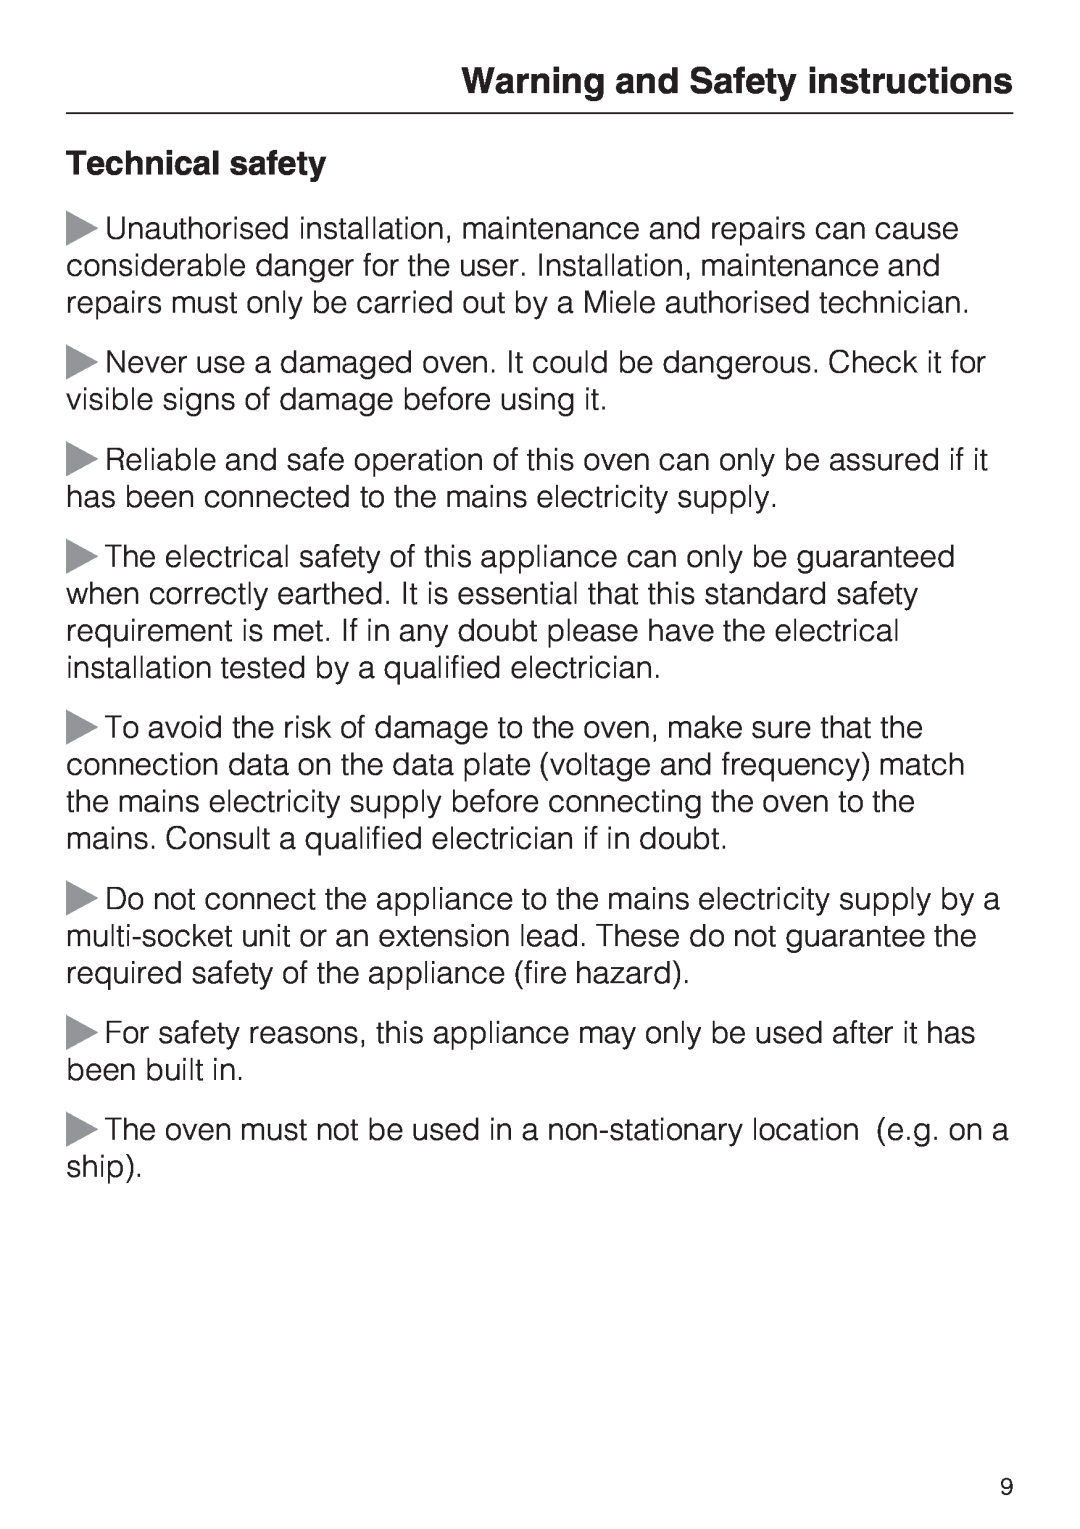 Miele 10 102 470 installation instructions Technical safety, Warning and Safety instructions 